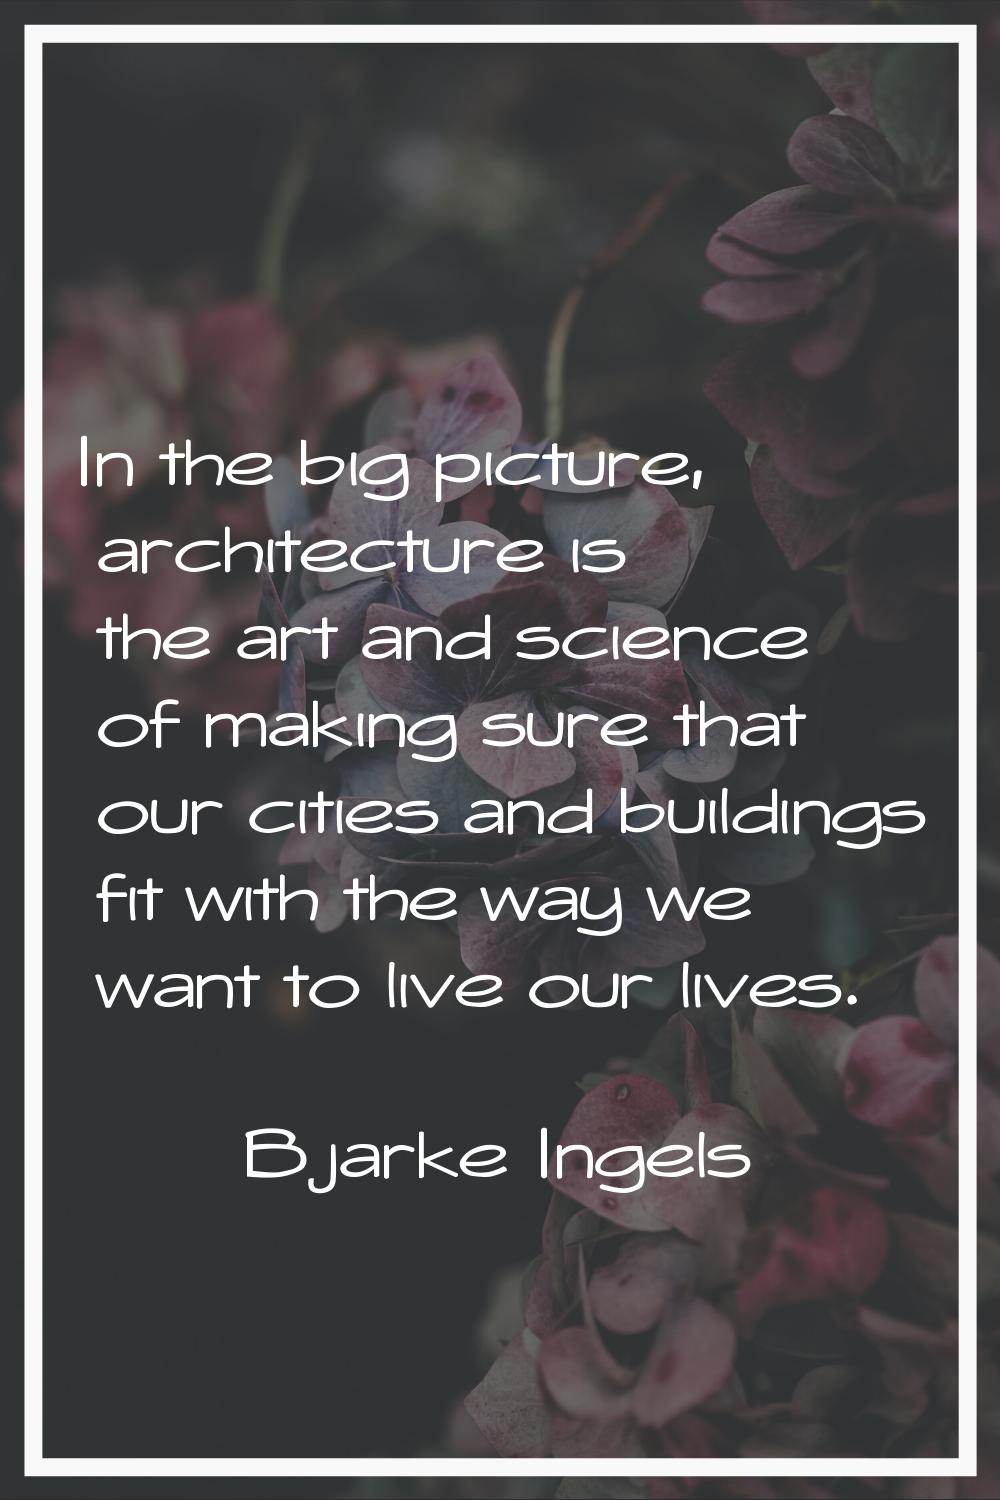 In the big picture, architecture is the art and science of making sure that our cities and building